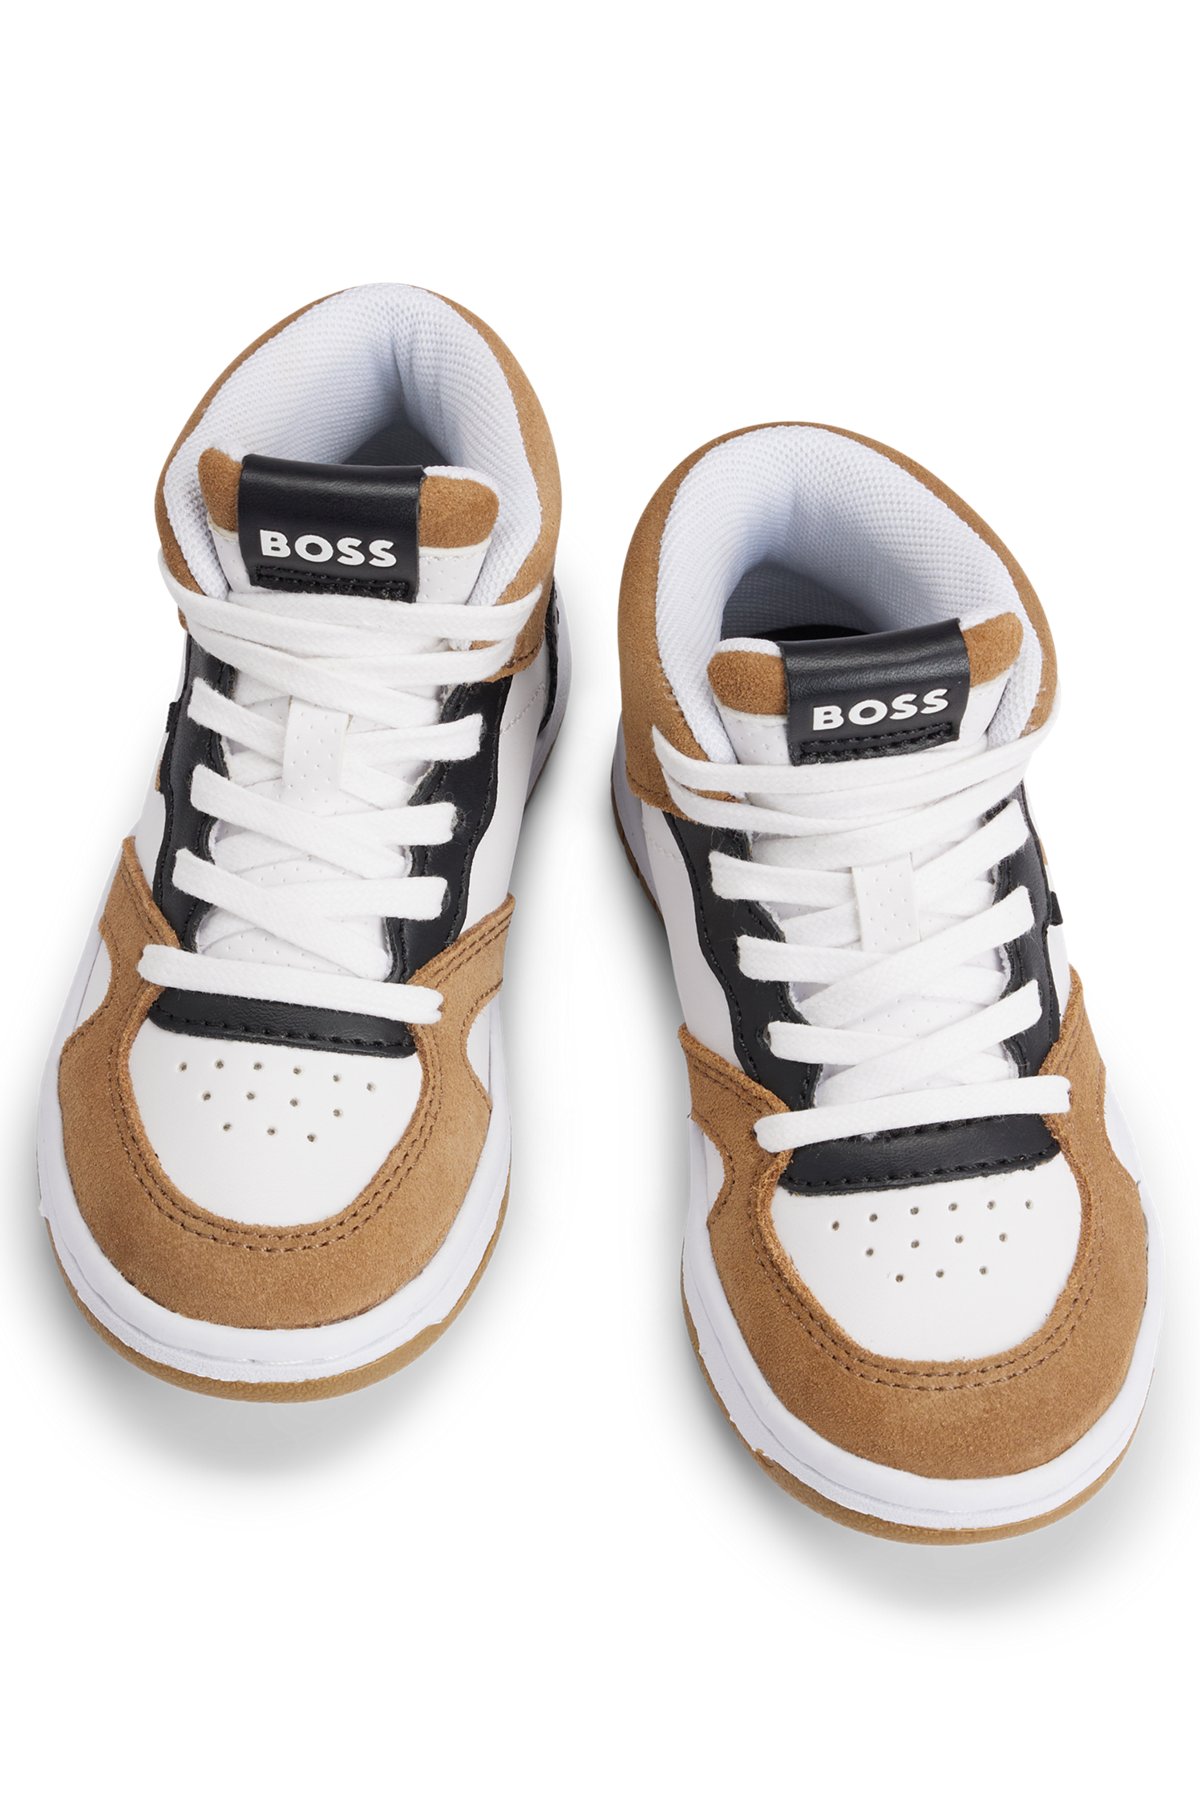 Kids' high-top trainers with logo details, White